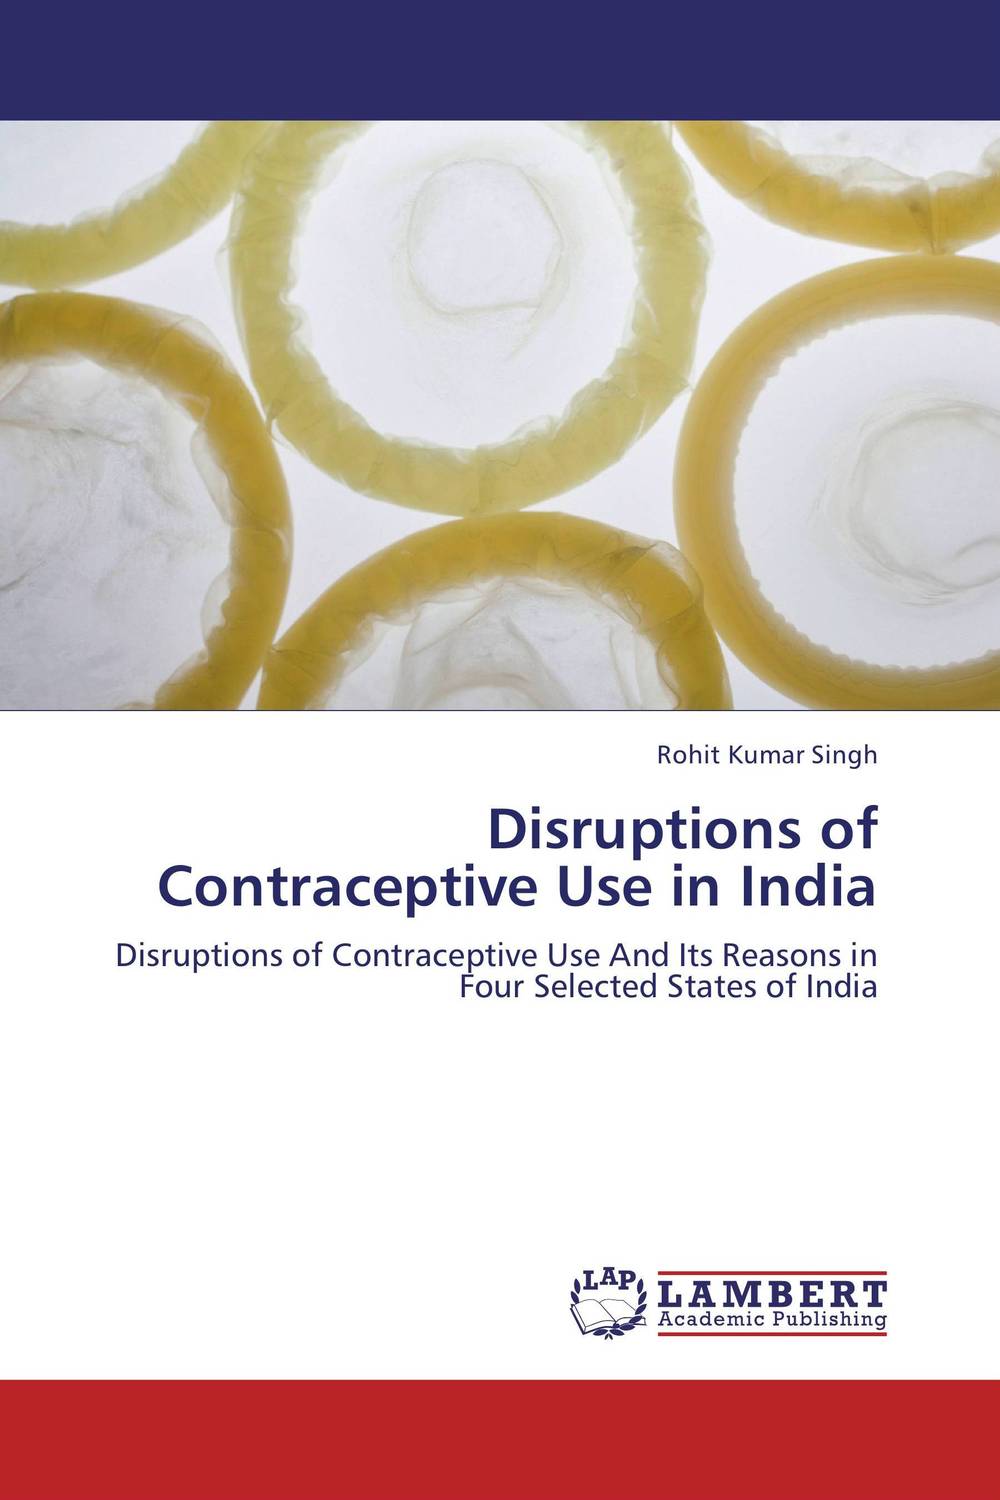 Disruptions of Contraceptive Use in India